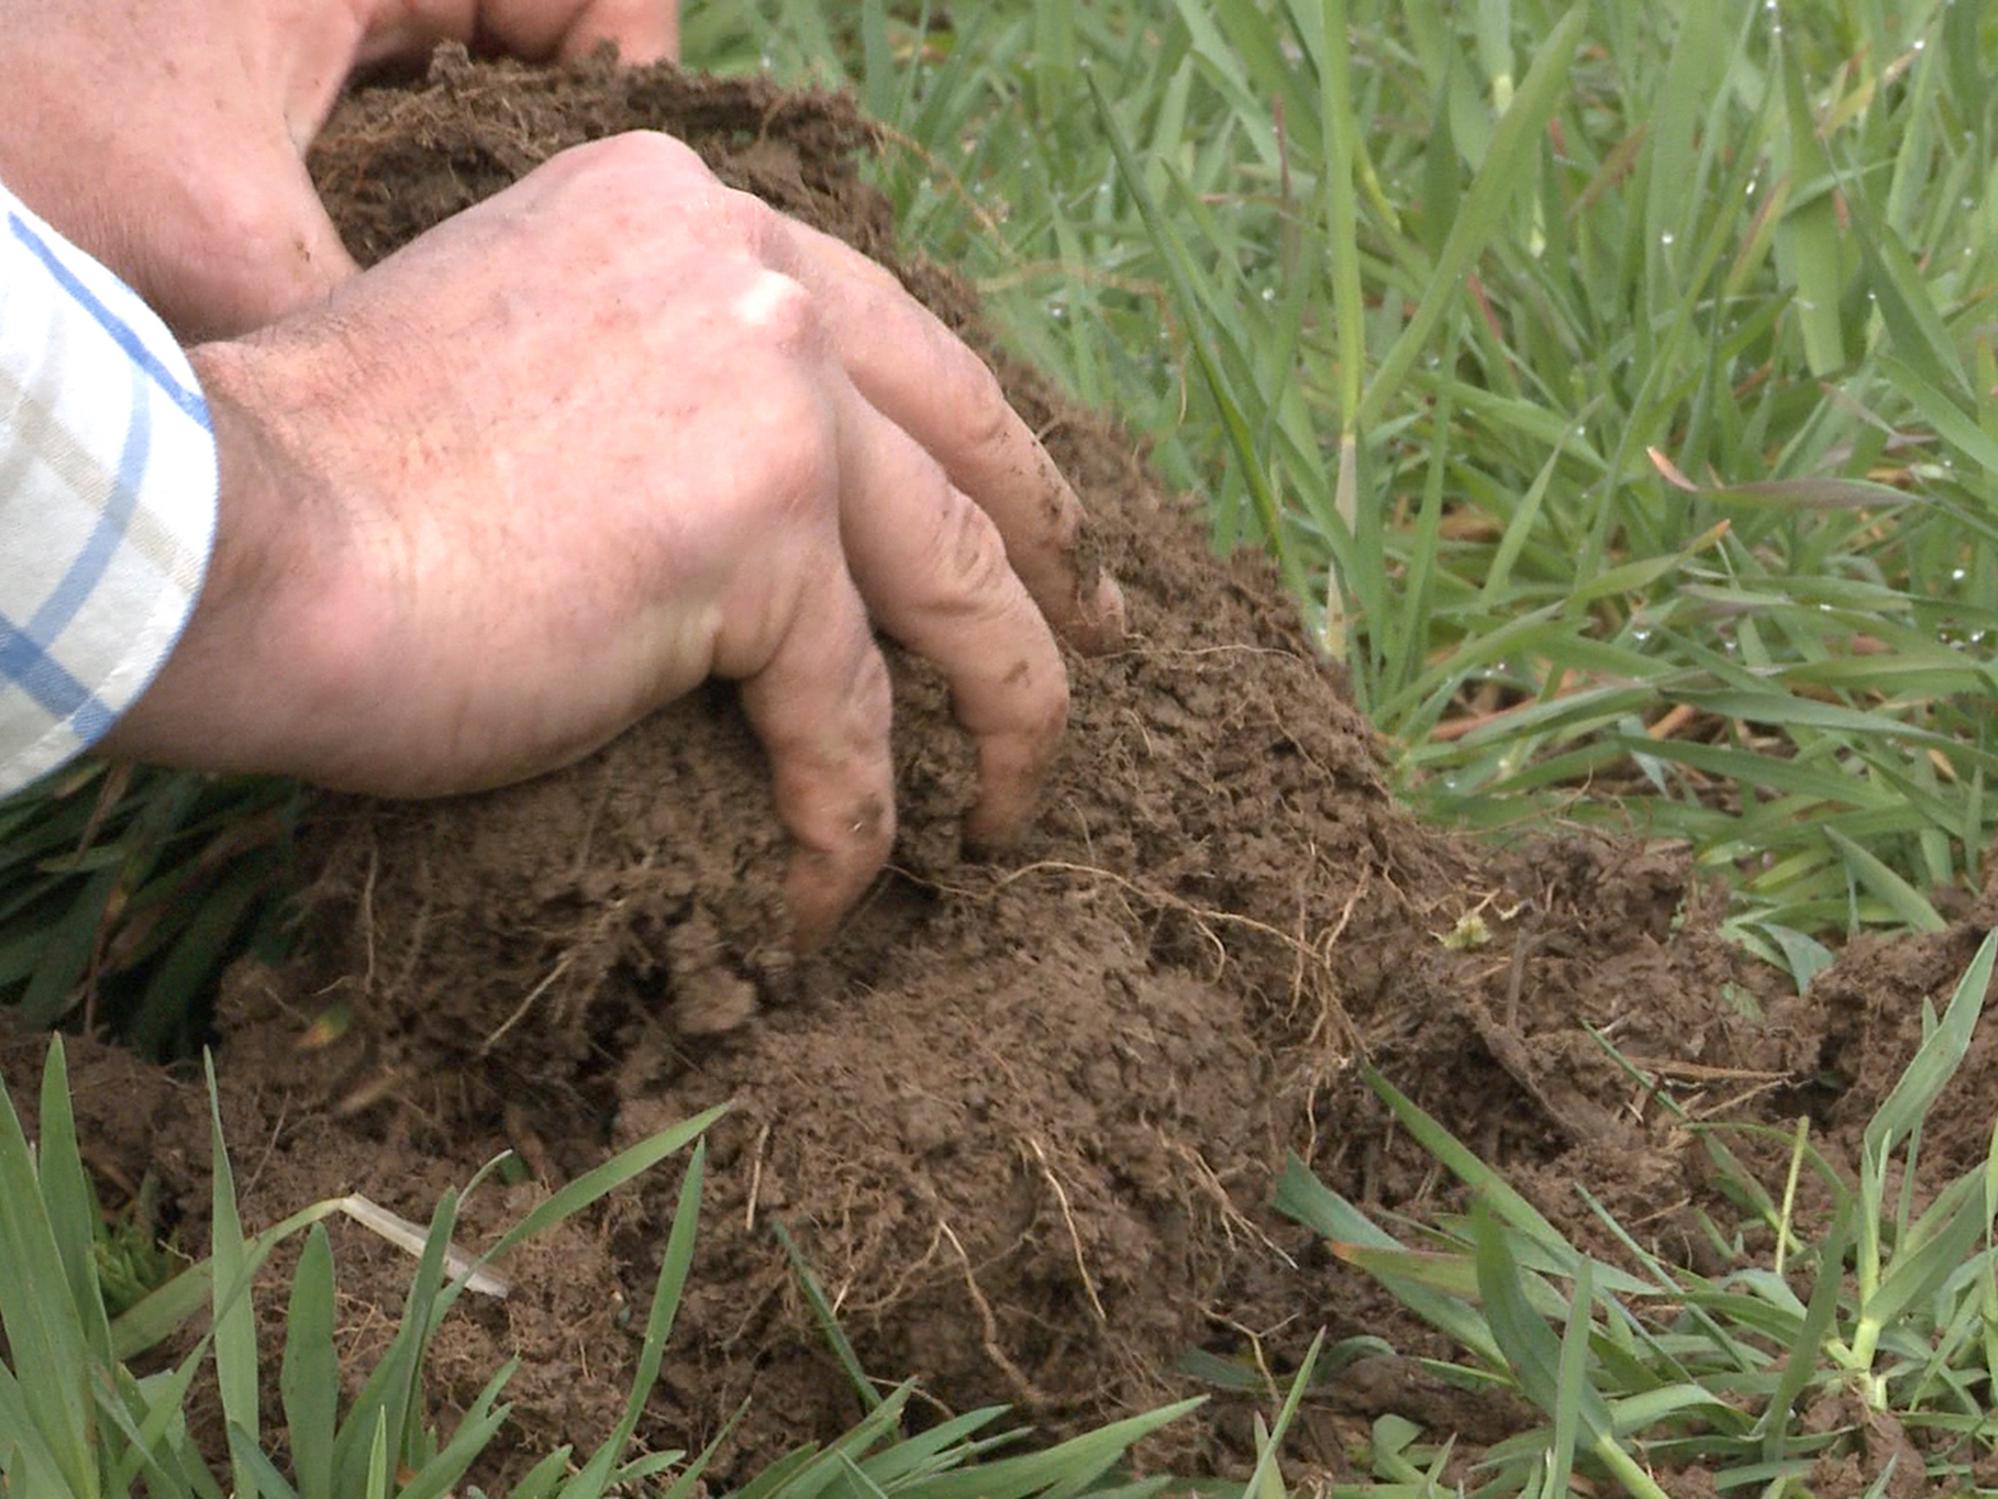 A pair of hands pull rich soil from the ground with green grass around it.